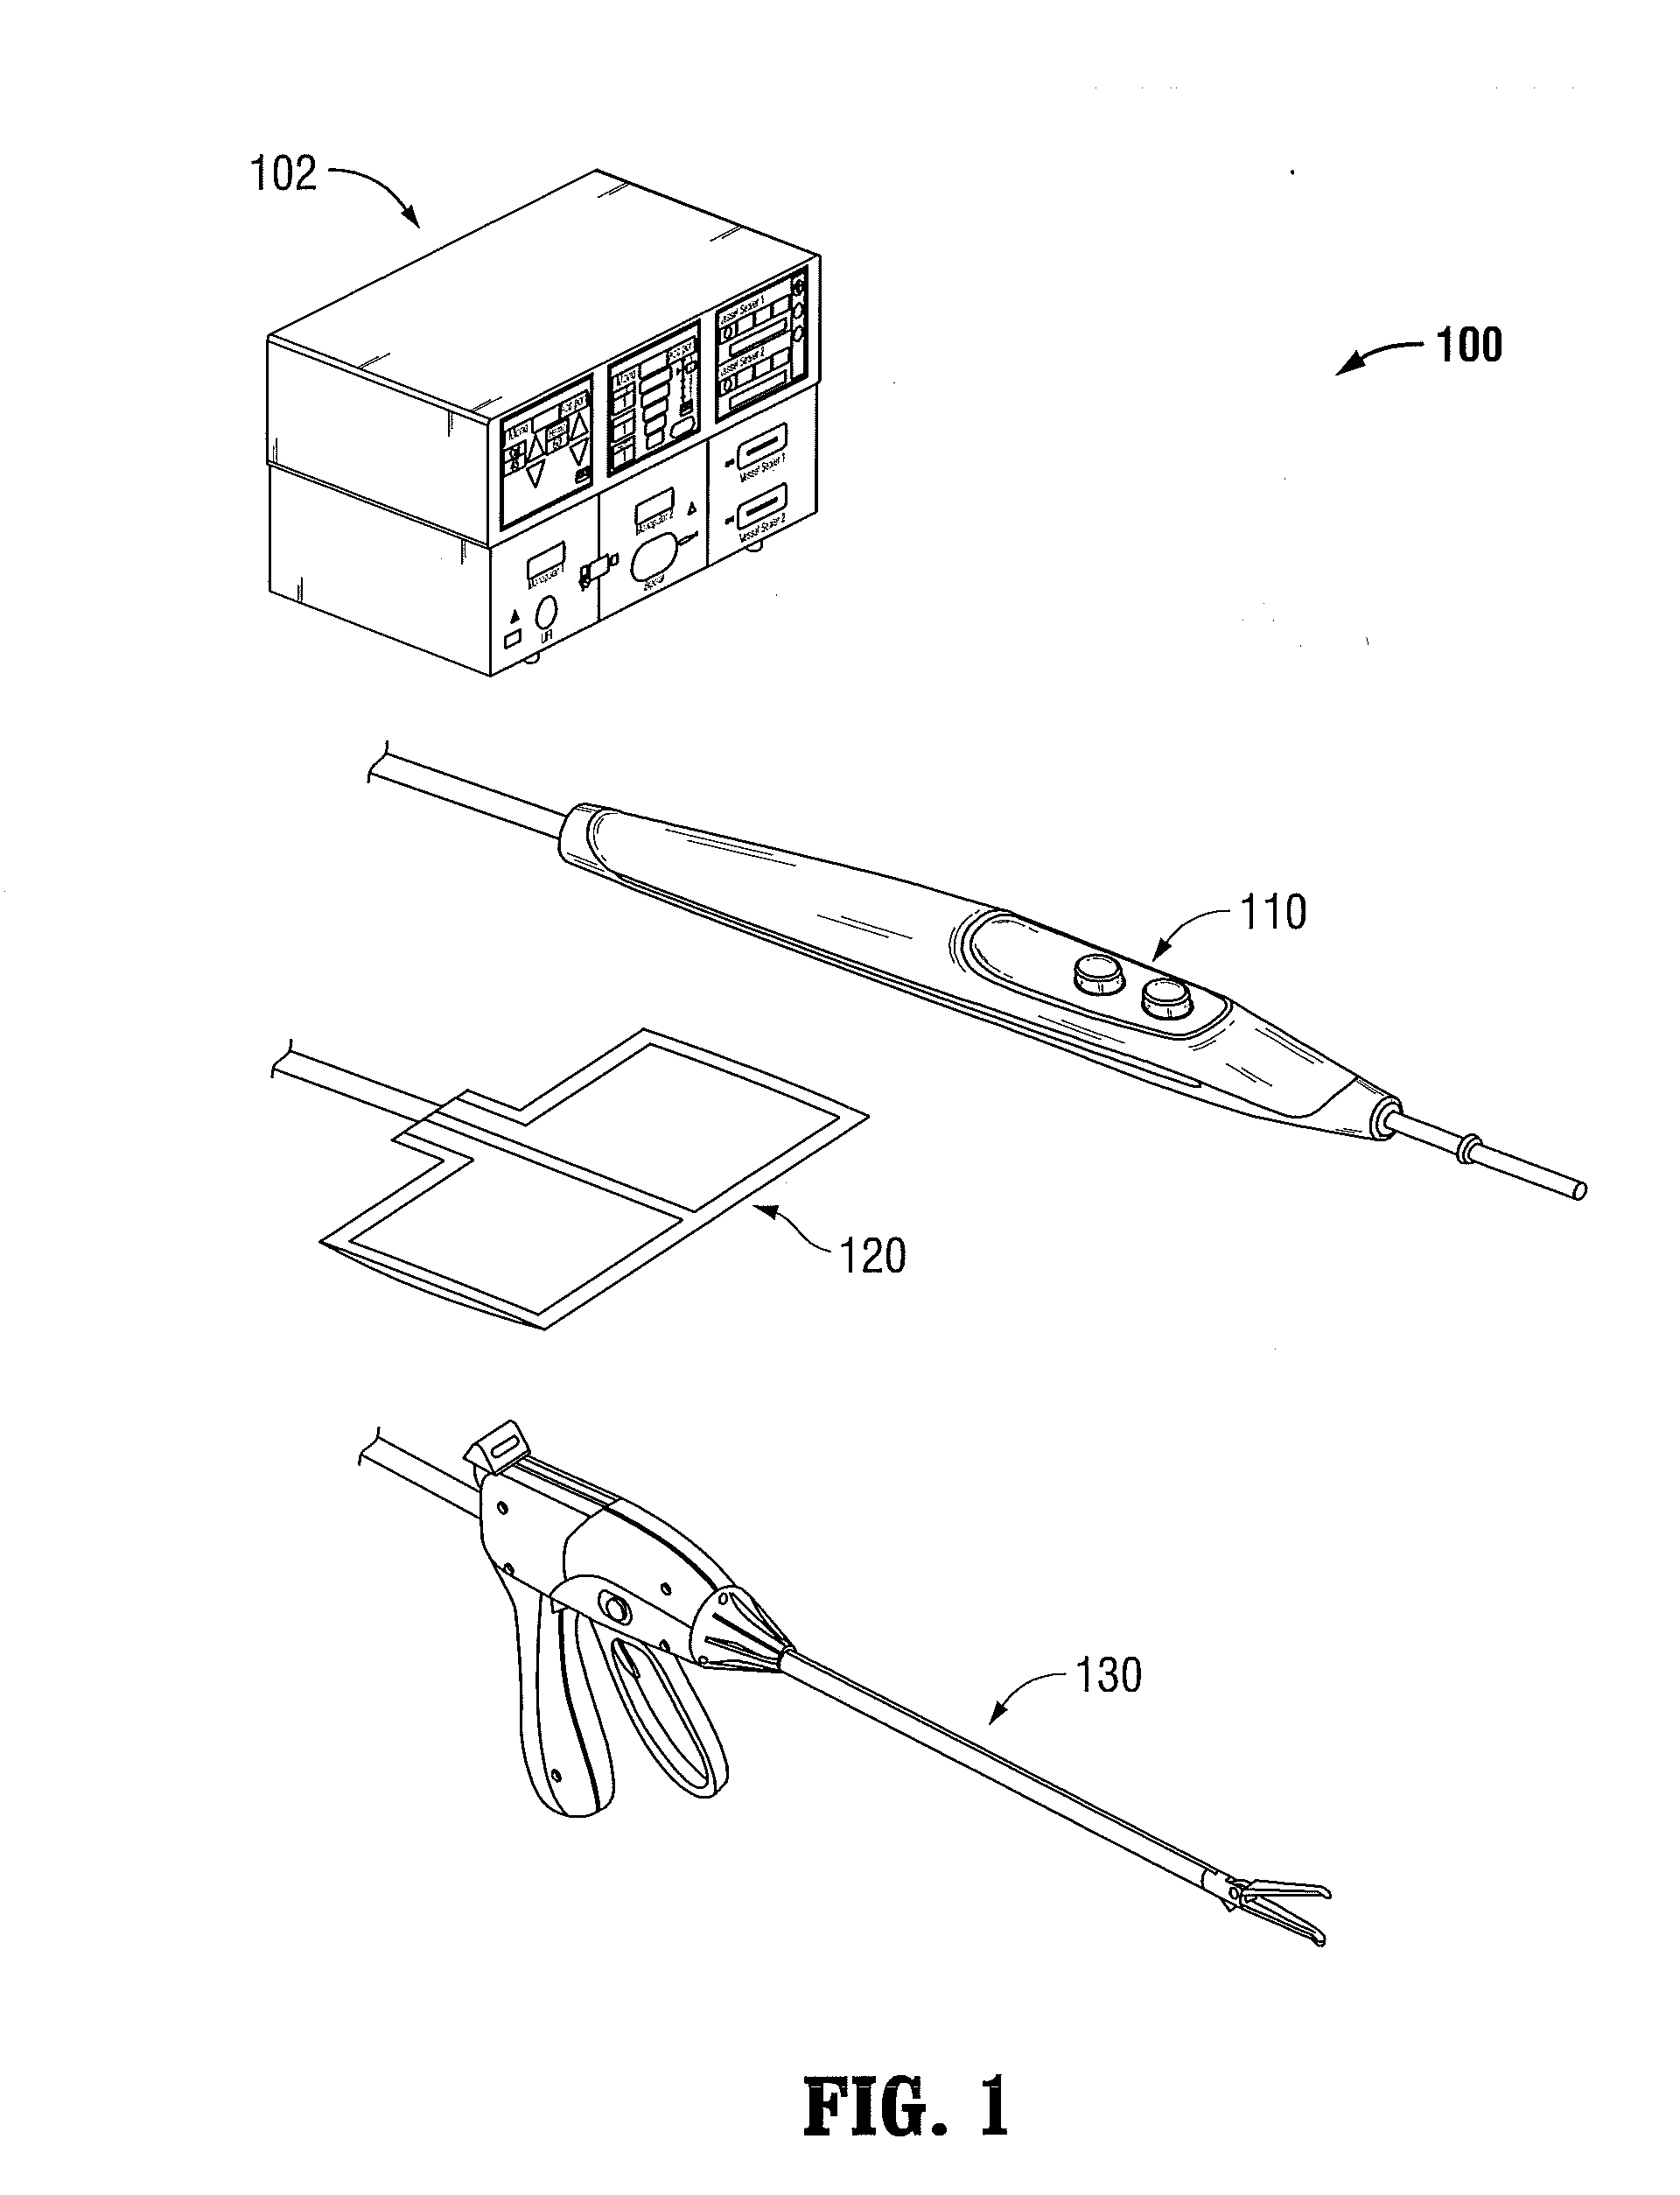 Systems and methods for generating electrosurgical energy using a multistage power converter